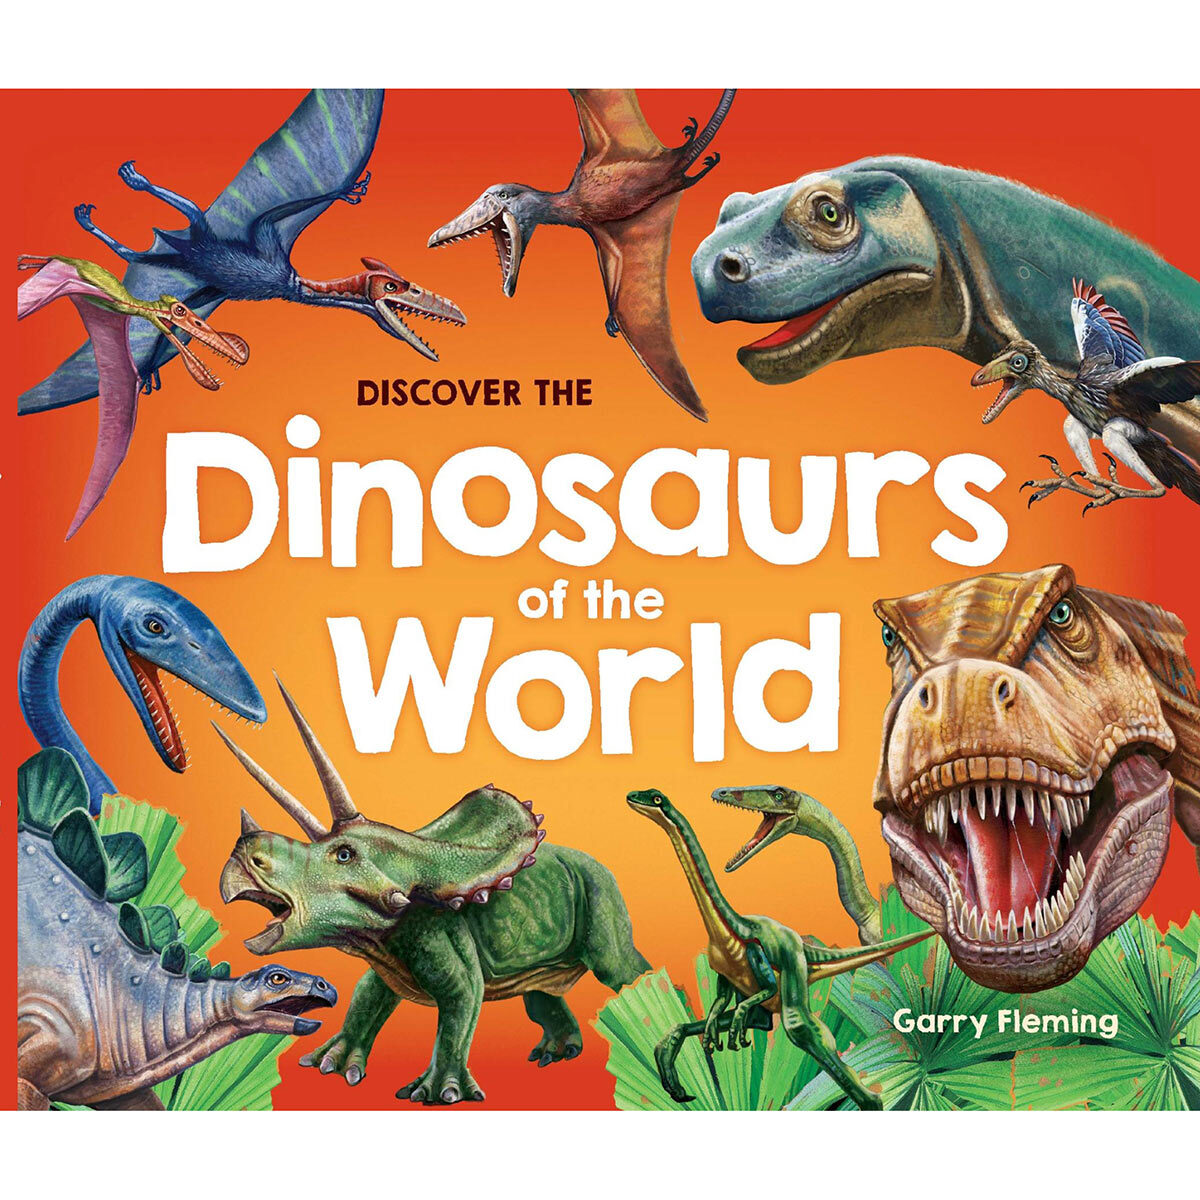 Discover The Dinosaurs of the World